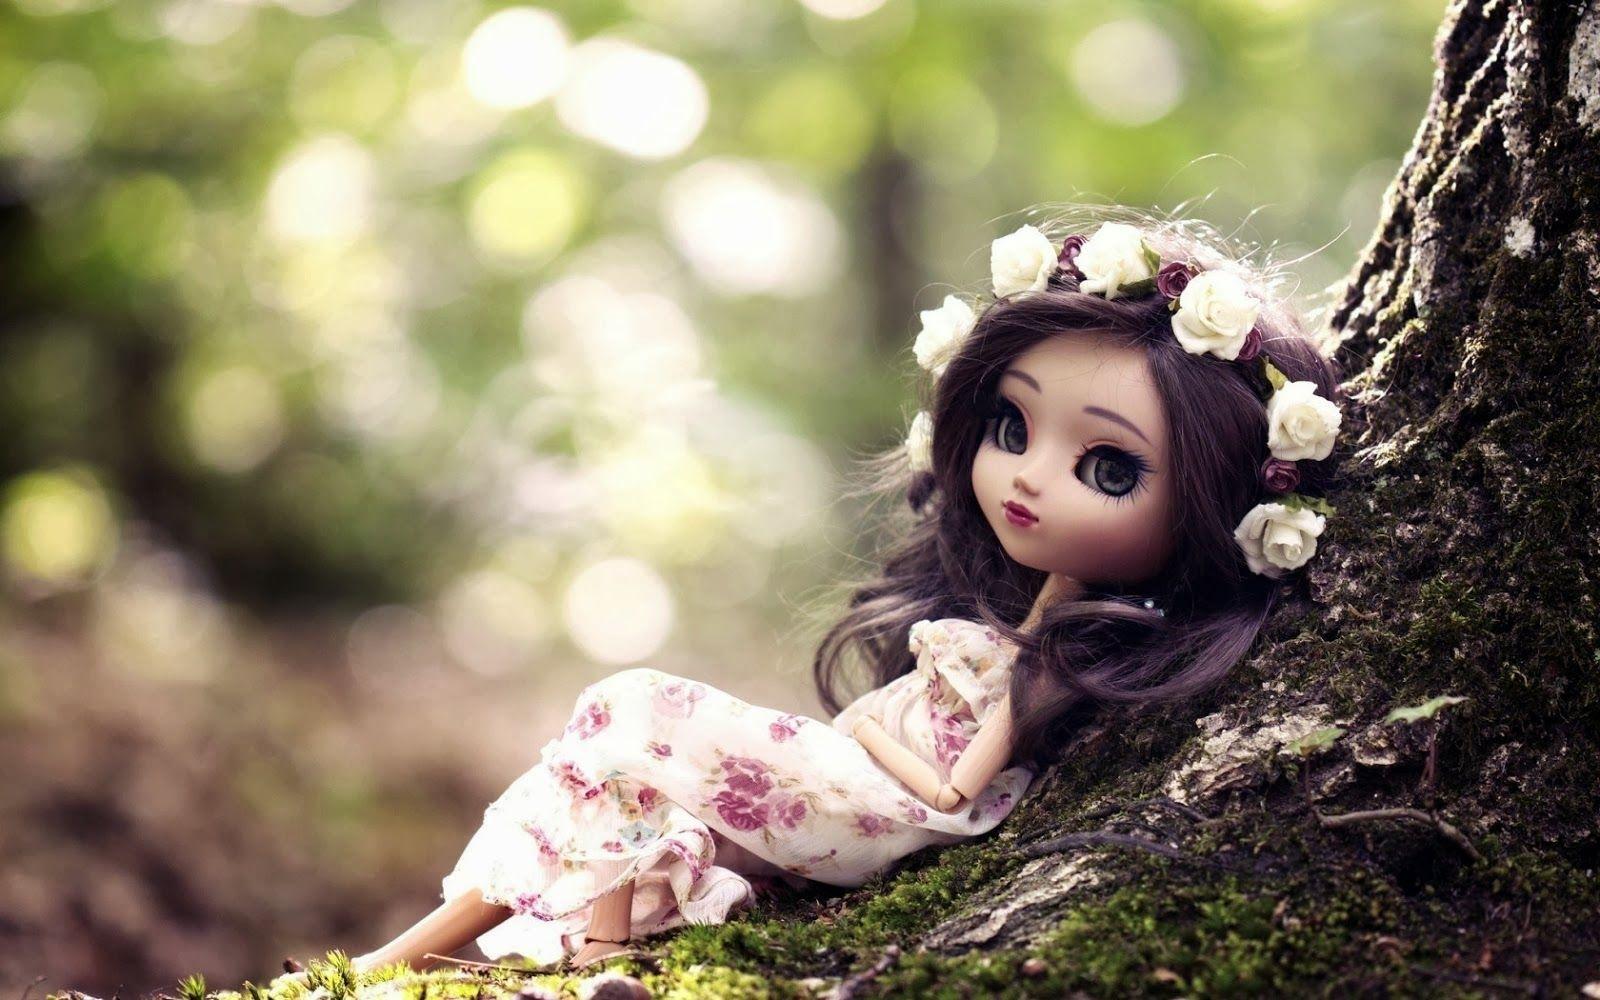 Missing Beats of Life: Cute Dolls HD Wallpaper and Image. Dolls